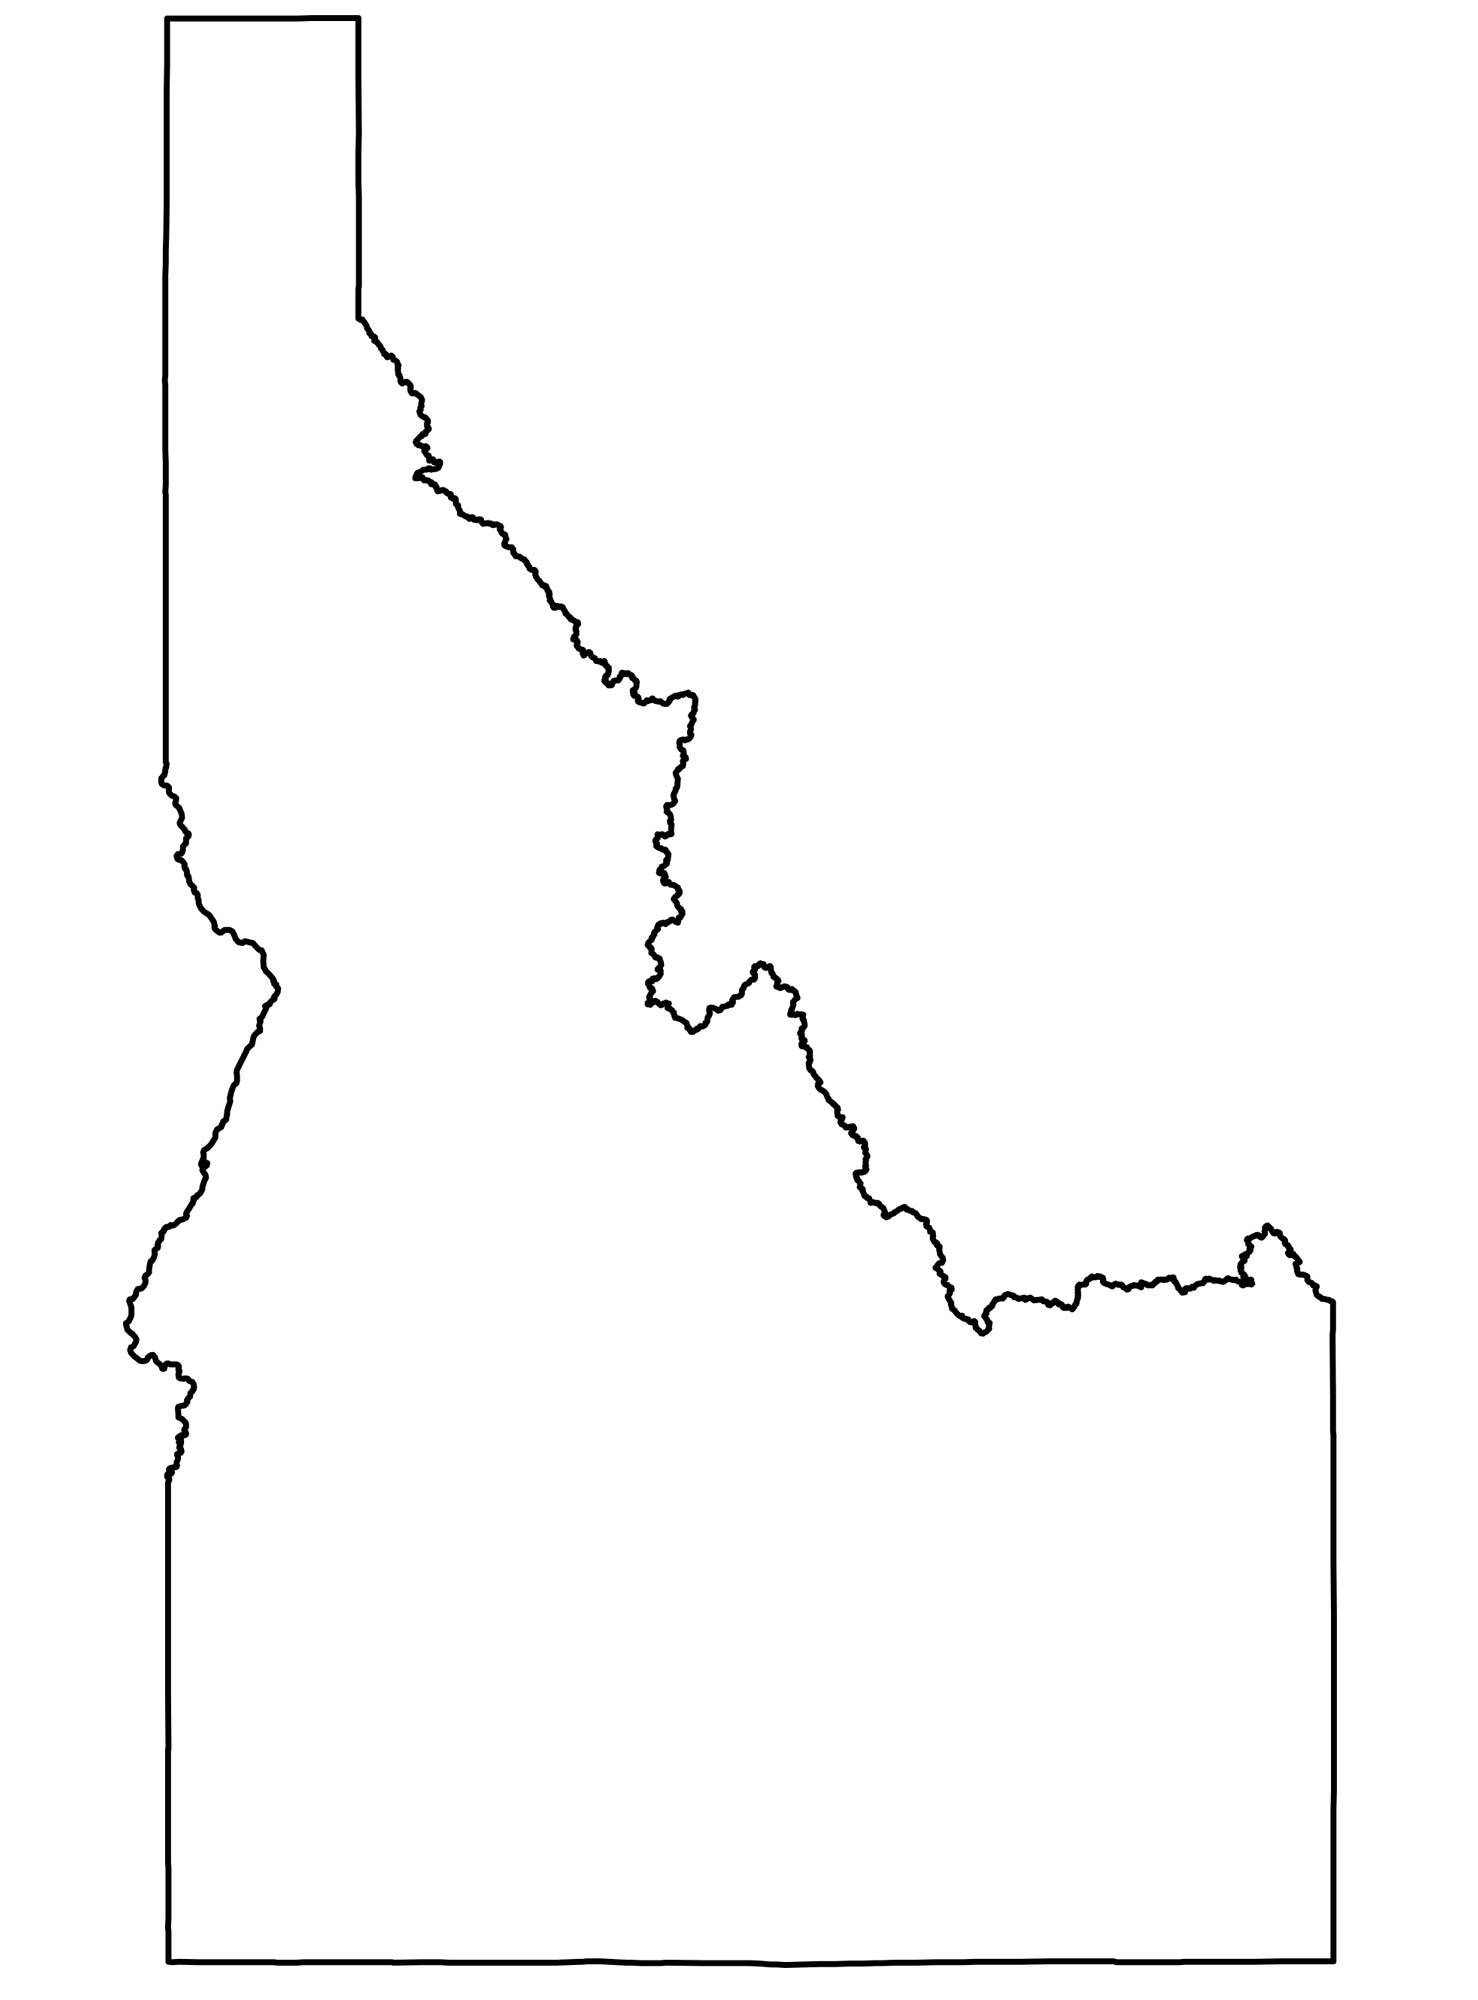 State Outlines: Blank Maps of the 50 United States - GIS Geography